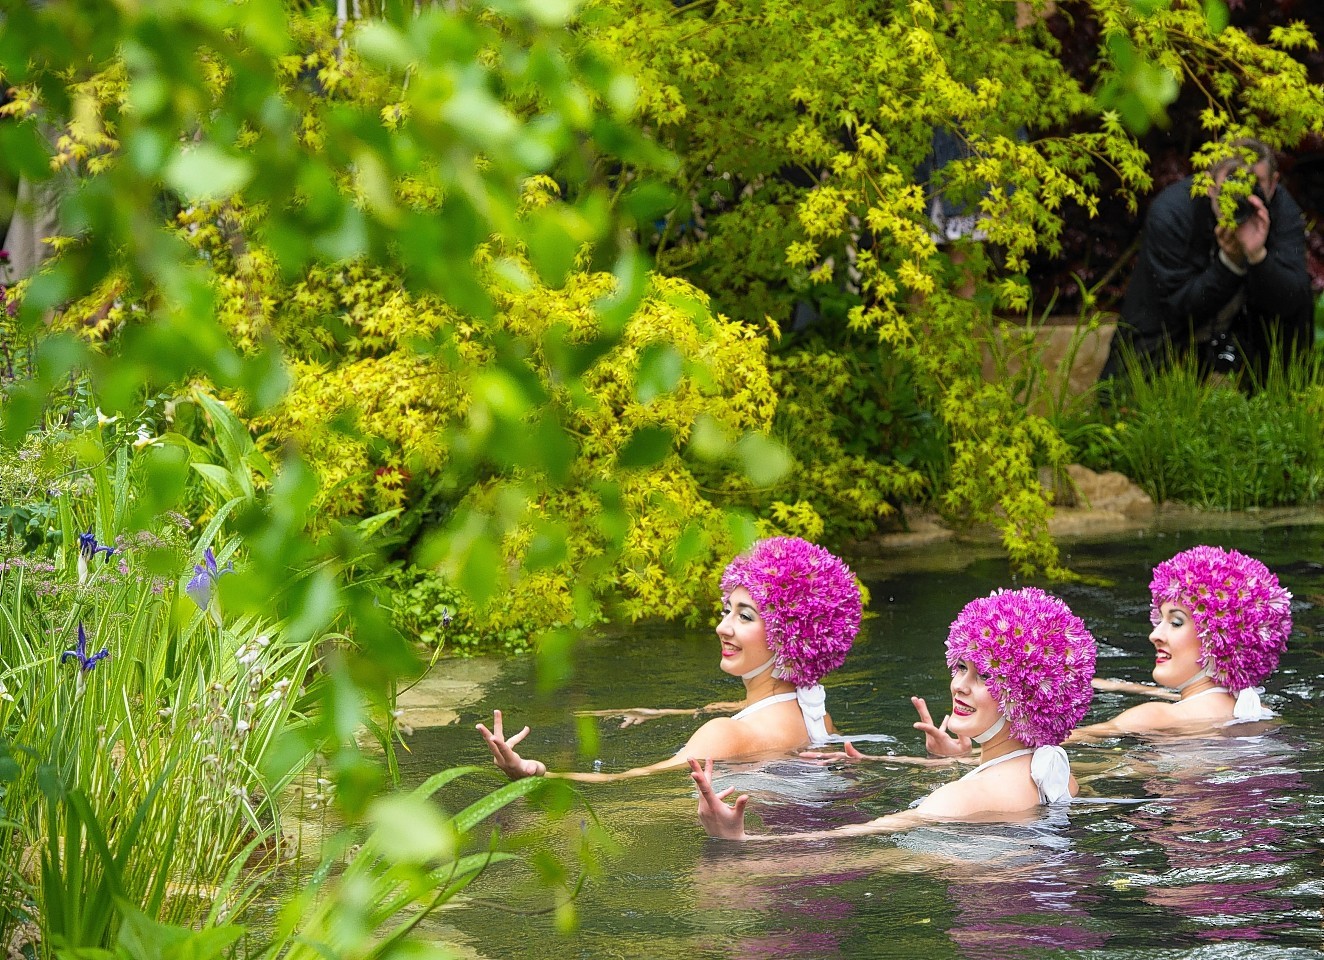 Synchronised swimmers perform in a pond at the M&G Retreat garden